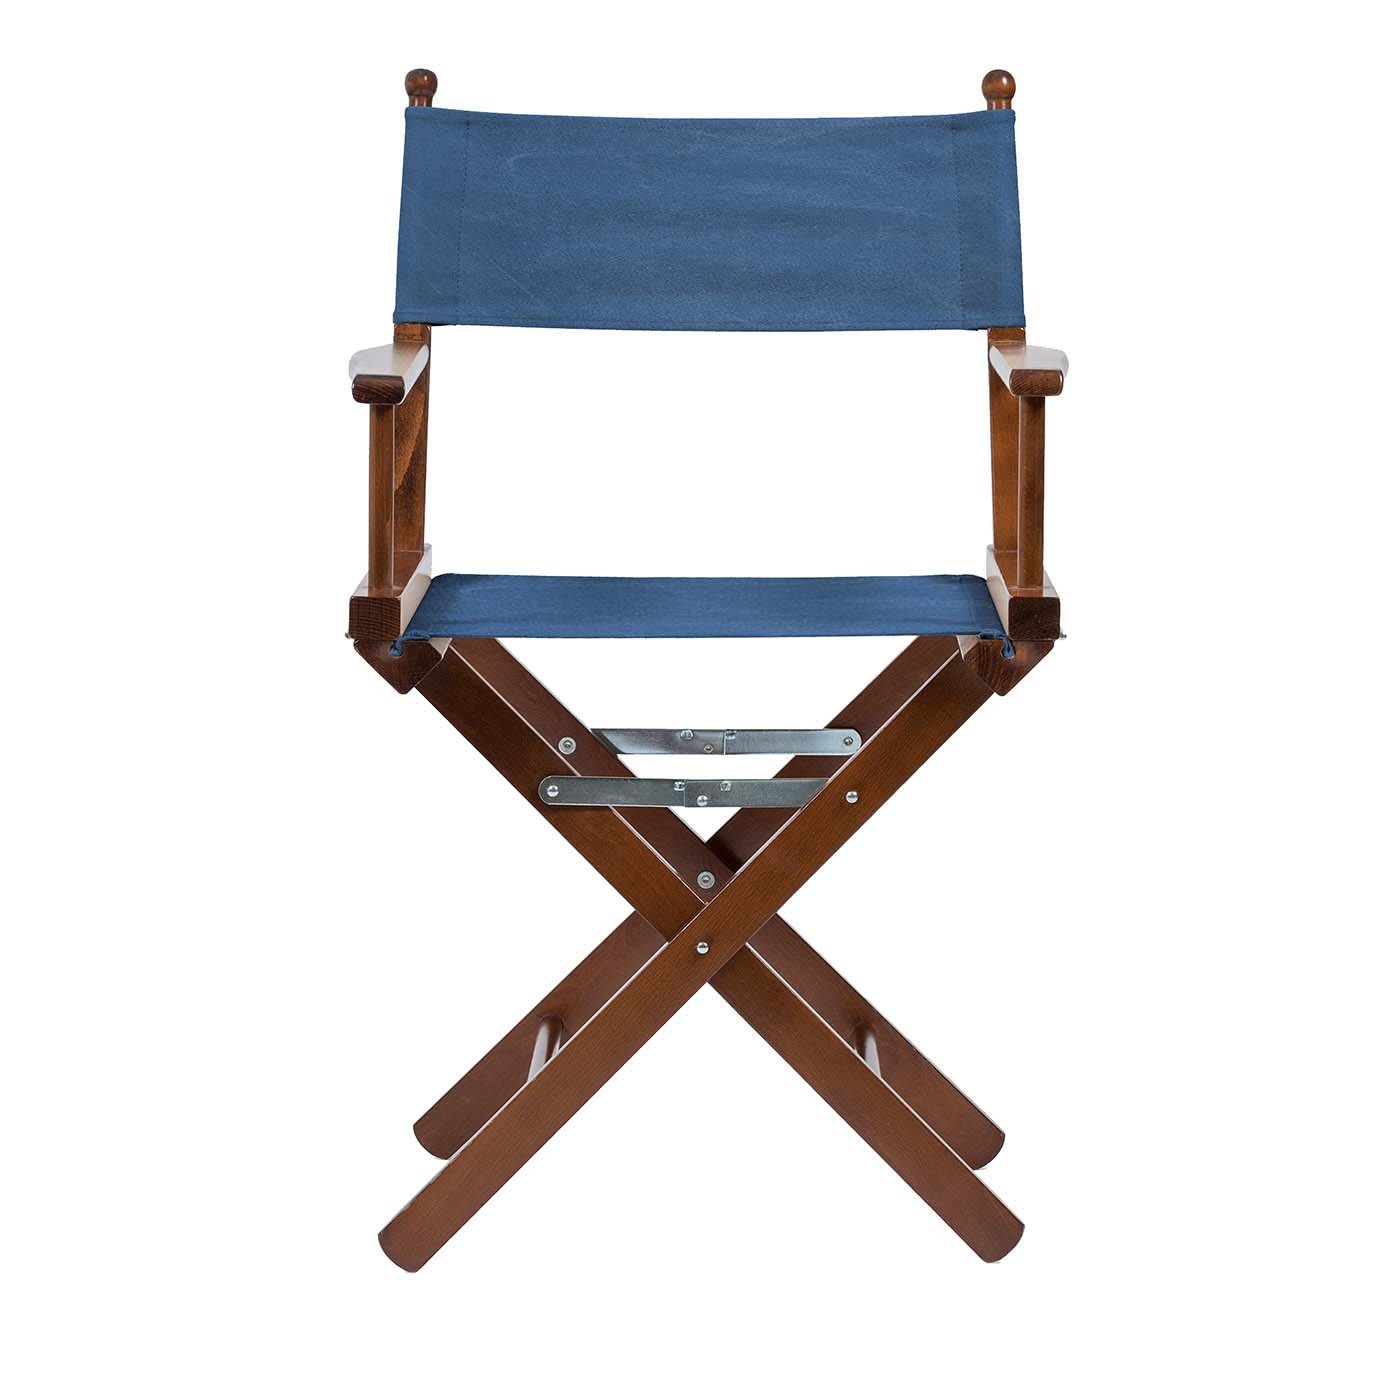 Director's Chair in Jeans Blue - Telami